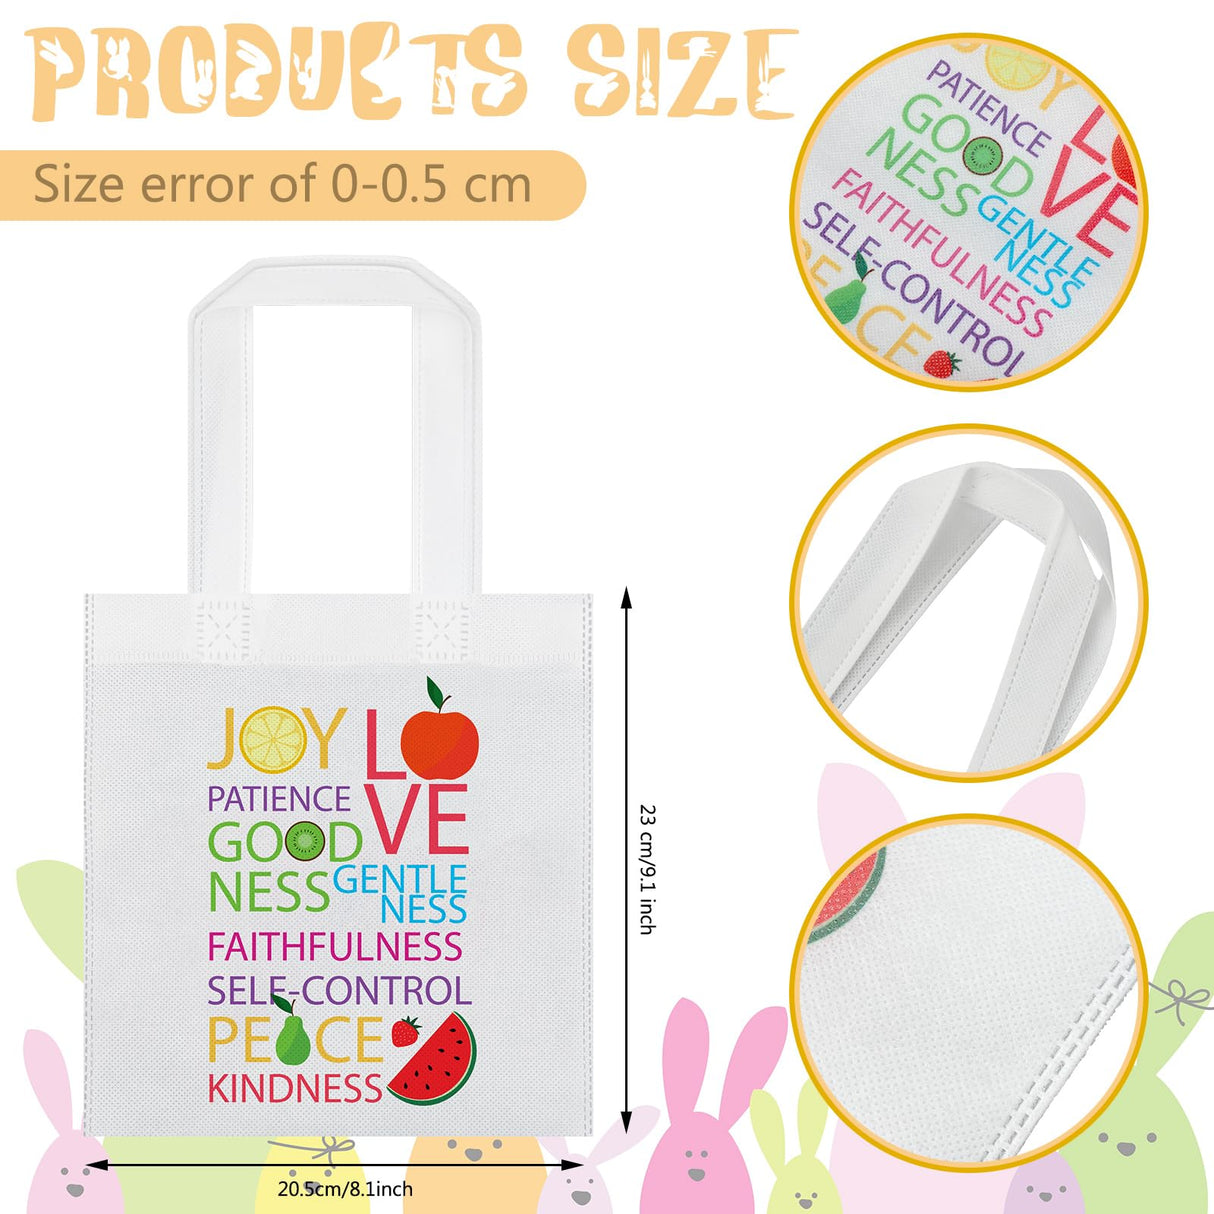 SilTriangle 24 Pcs Fruit of the Spirit Tote Bags Bulk for Kids Easter Colorful Sunday School Gifts Christian Church Bags Easter Novelty Bags Religious Tote Bags Easter Crafts Religious Toys